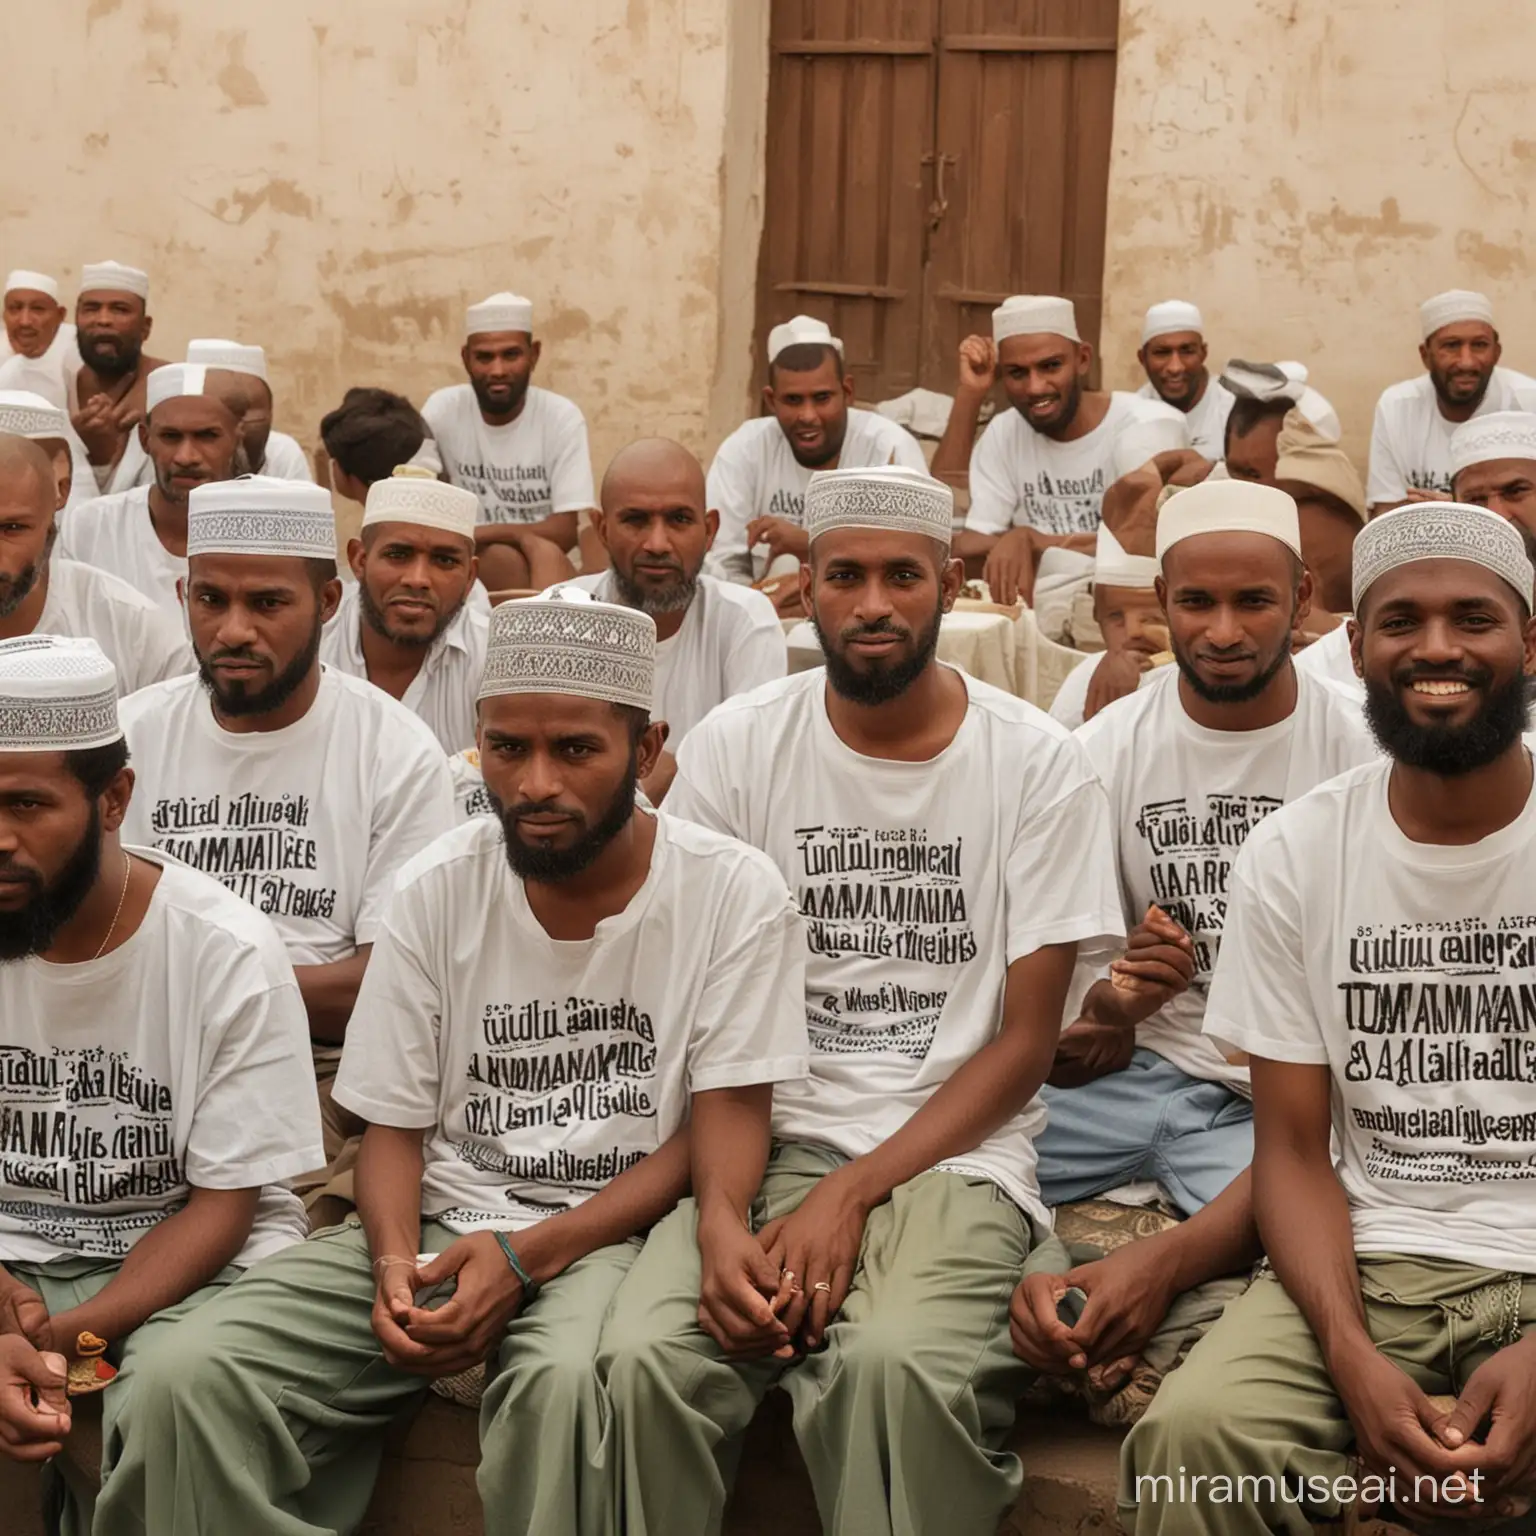 A man next to few Islam people, all wearing Islamic attire, one of them is wearing a t-shirt written TUMANA Nikuletee seated, and eating. The tshirts must be written TUMANA Nikuletee, they must be Africans